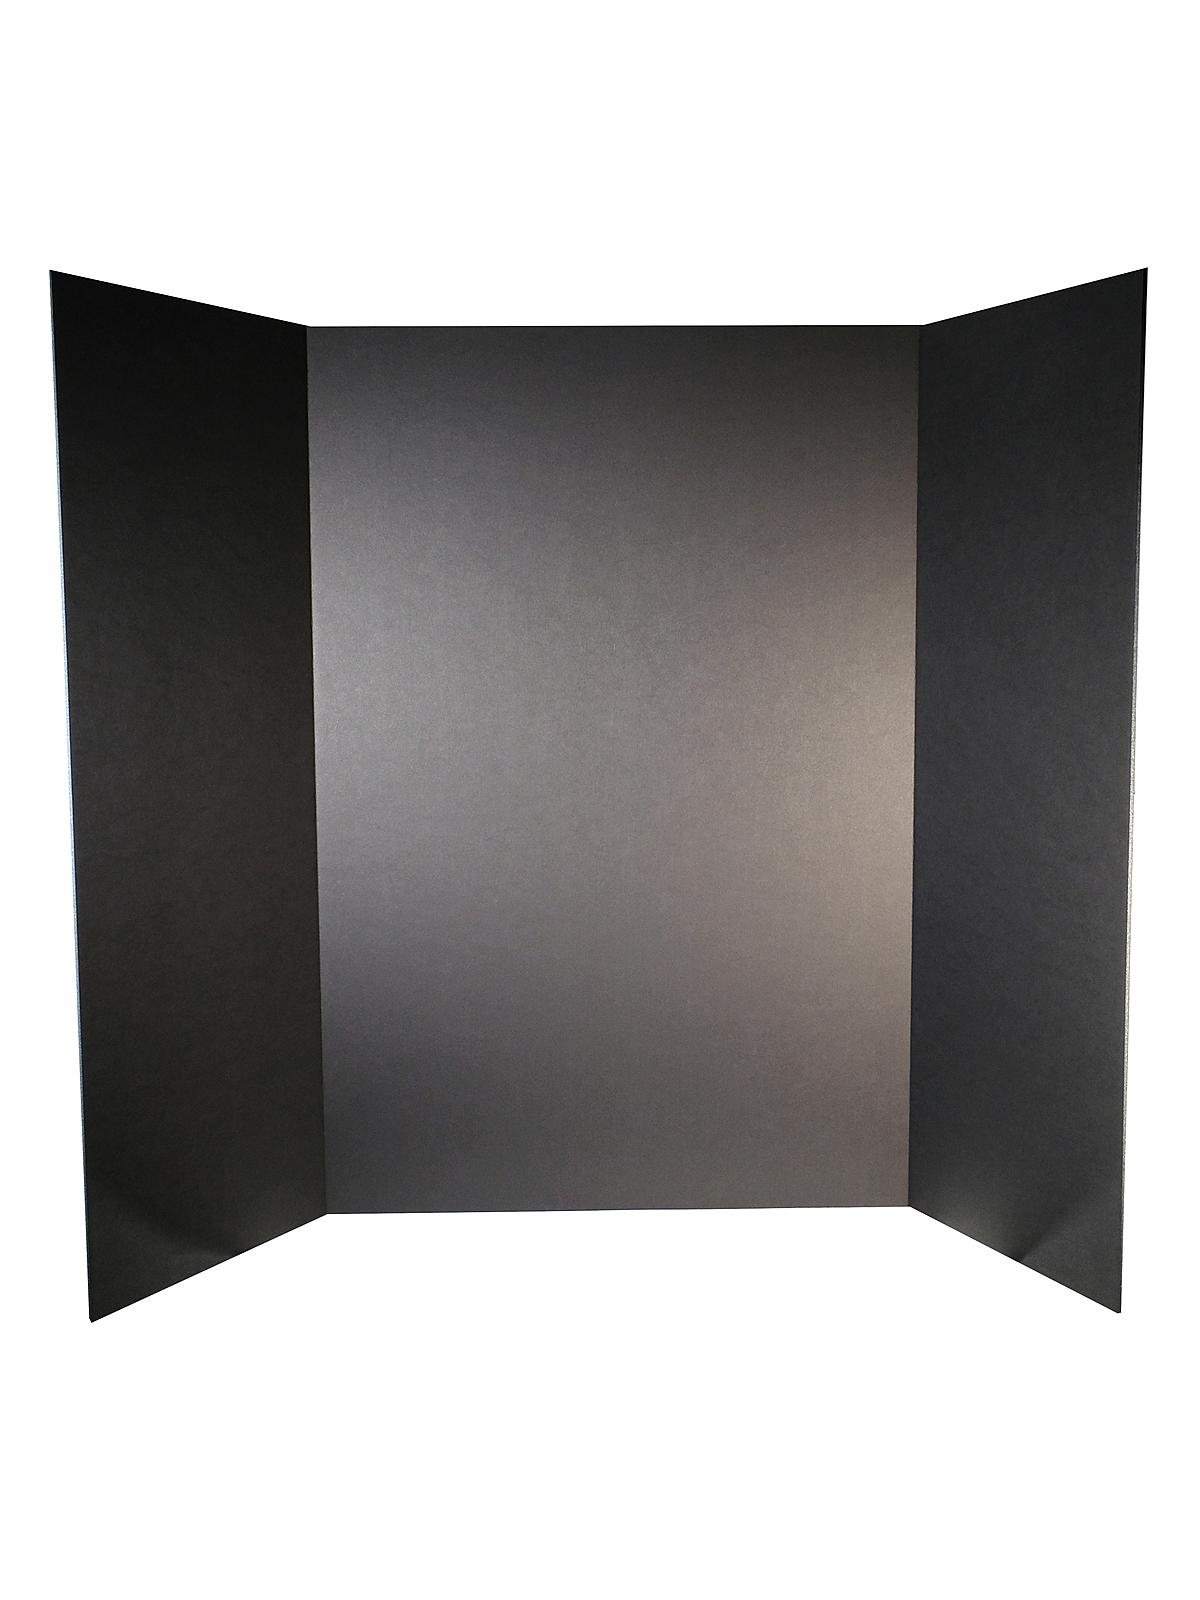 Elmer's 730300 Corrugated Display Board White for sale online 